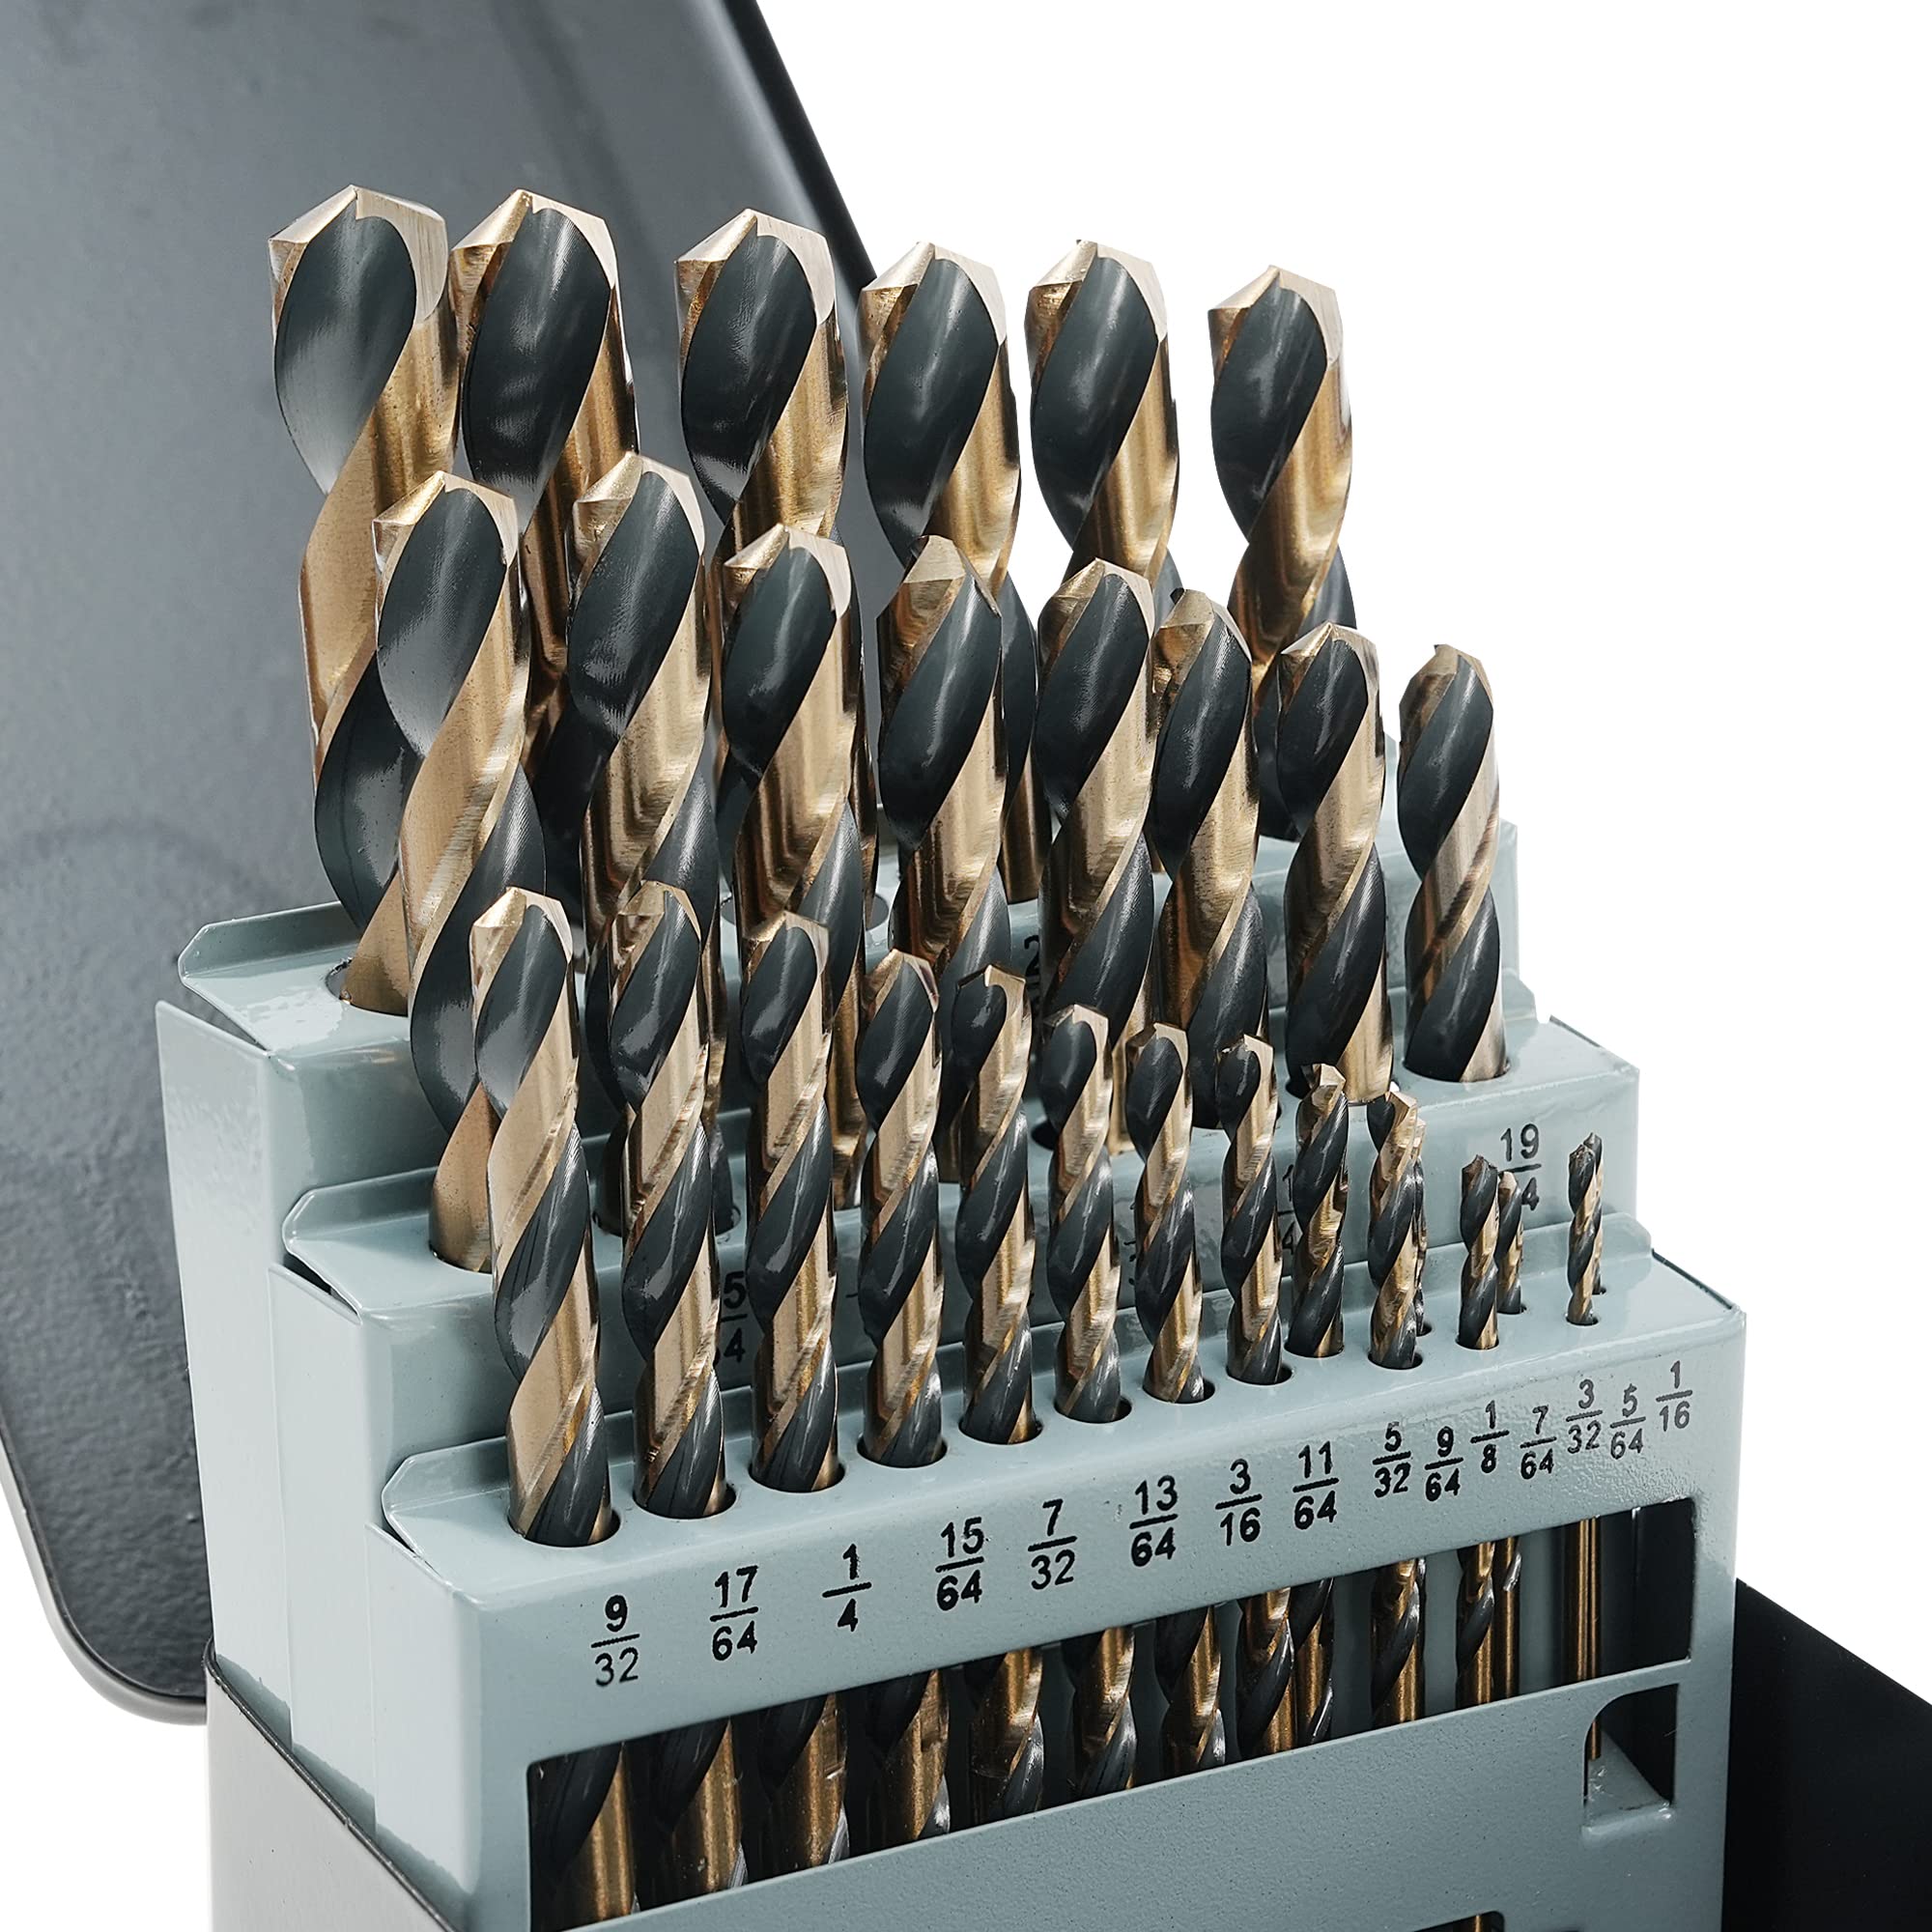 GMTOOLS 29Pcs Drill Bit Set, 135 Degree Tip High Speed Steel with Black and Gold Finish, Twist Jobber Length Drill Bit Kit for Hardened Metal, Cast Iron, Stainless Steel, Plastic and Wood with Metal Indexed Storage Case 1/16